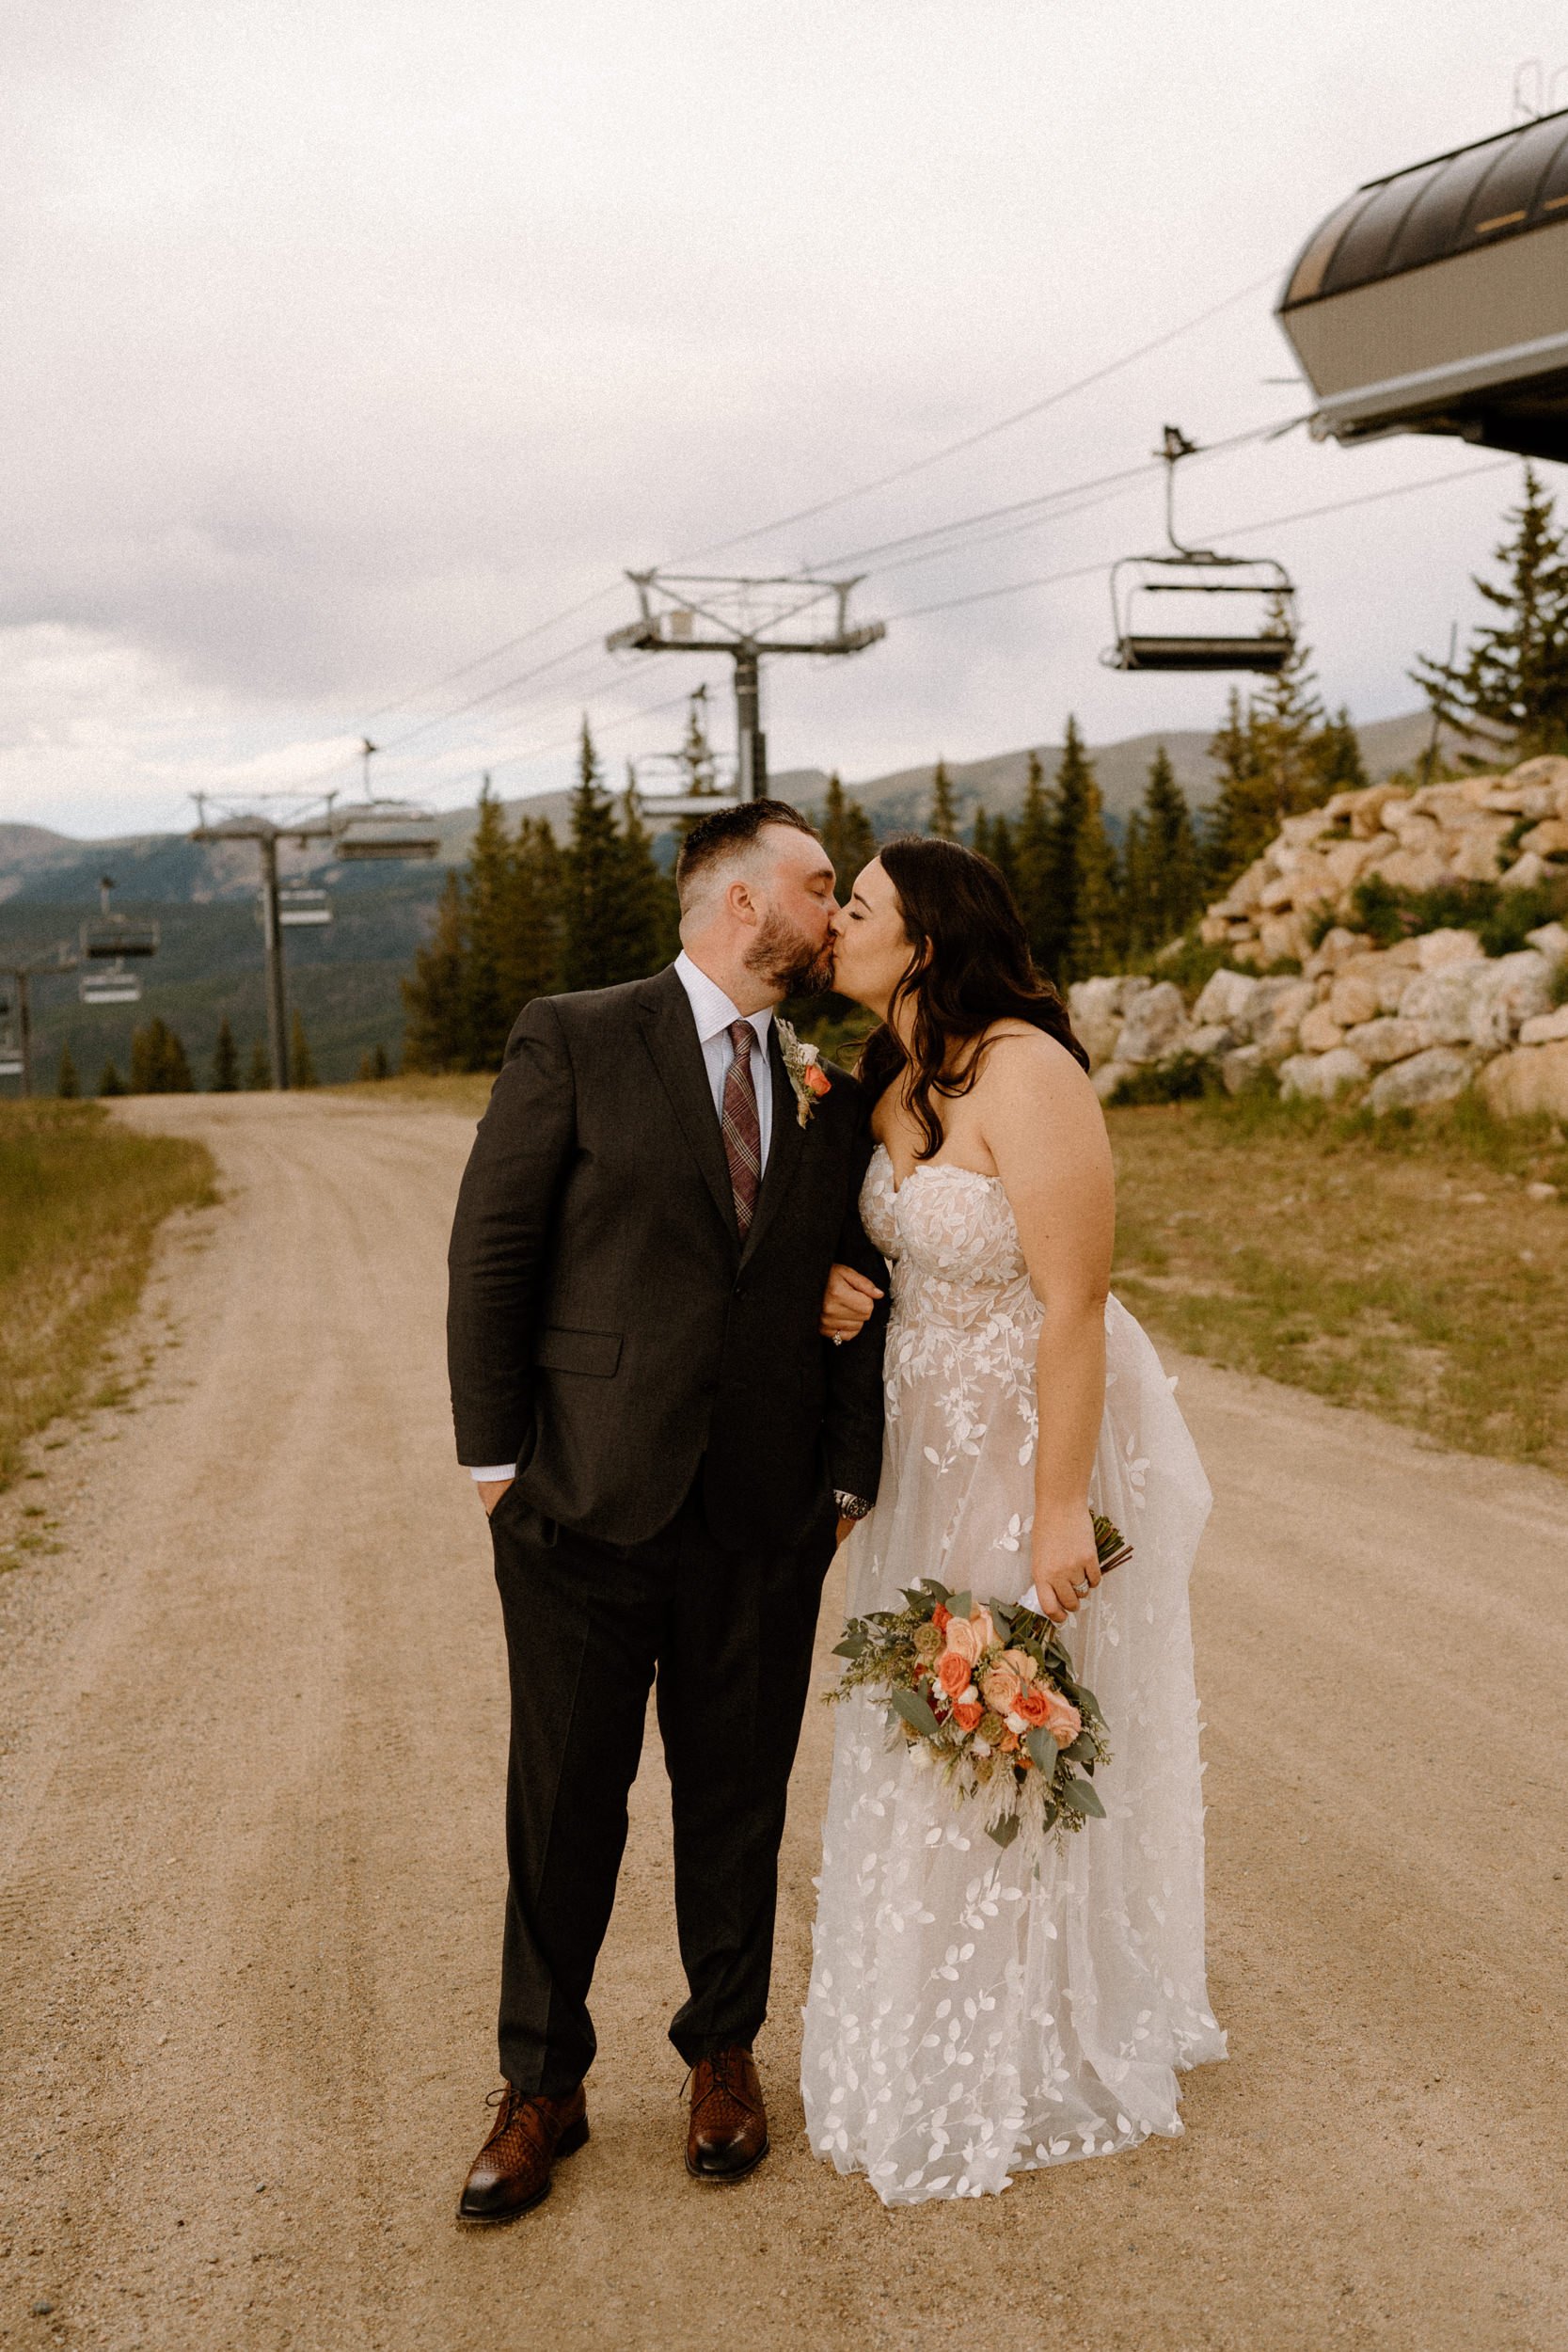 Bride and groom kiss in front of chairlifts at Lunch Rock in Winter Park, CO